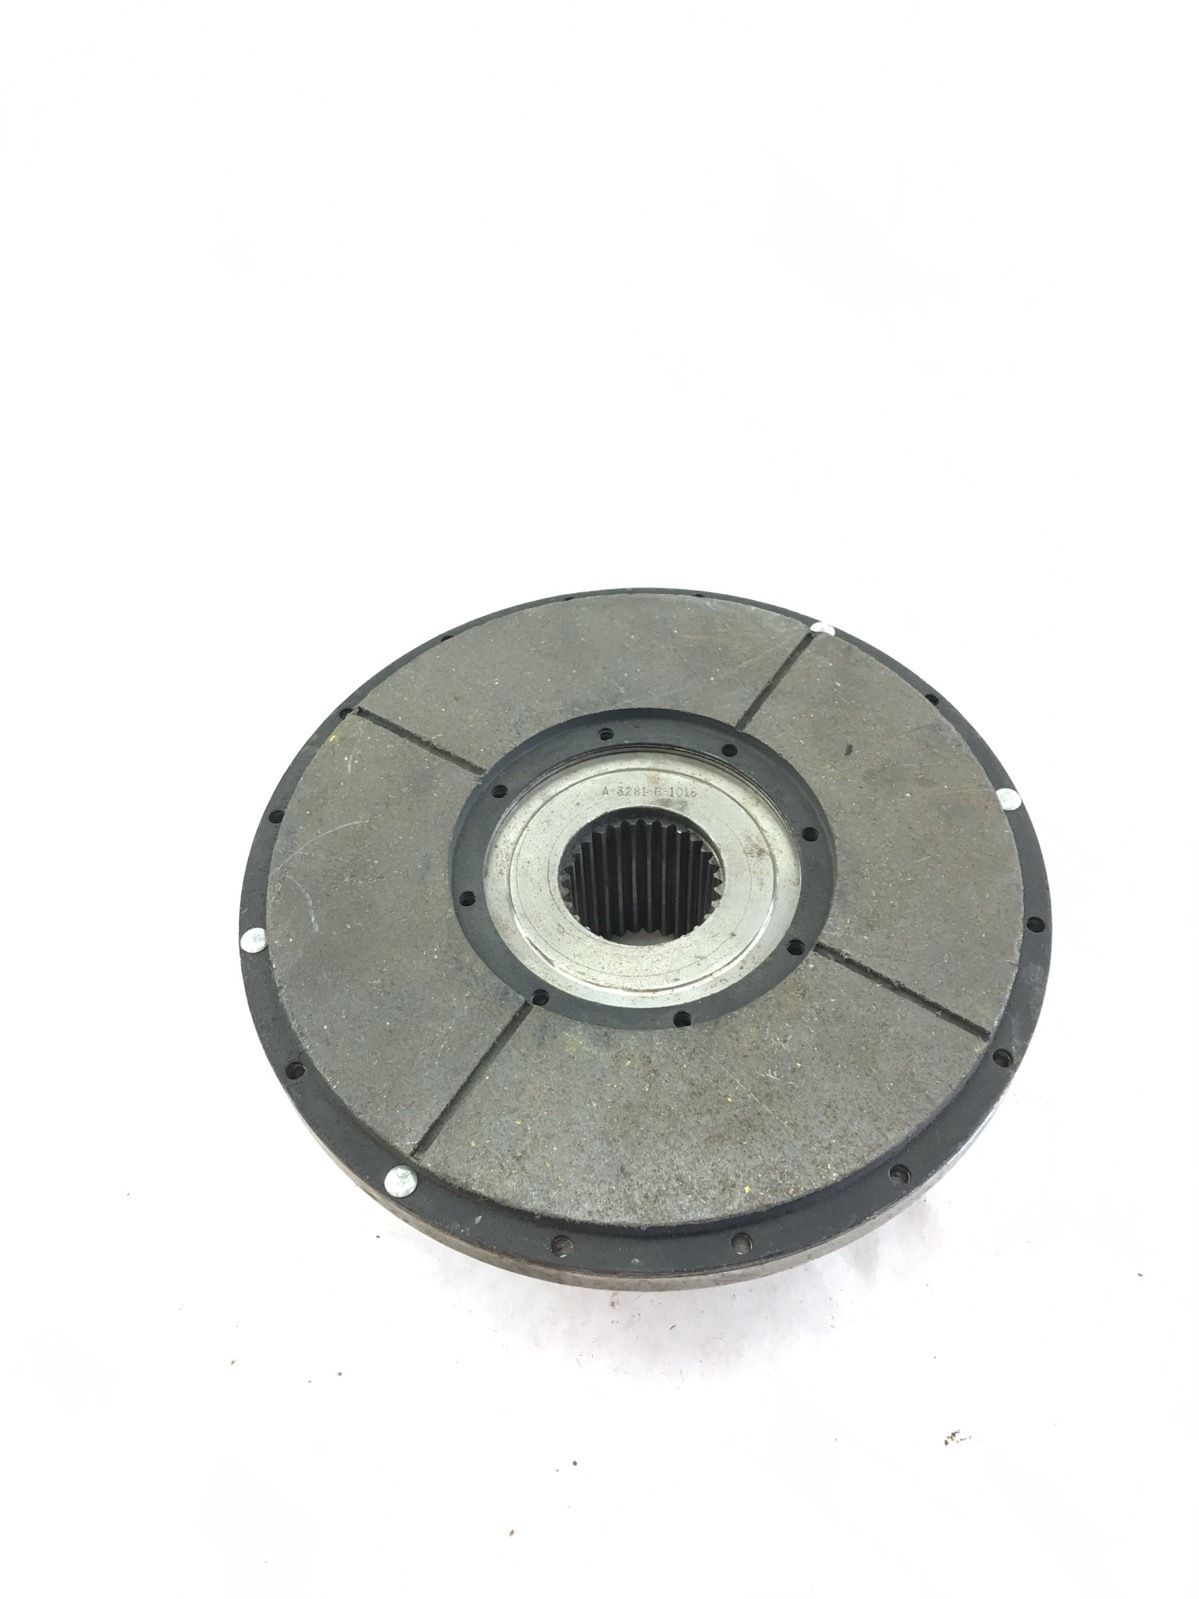 USED GREAT CONDITION ROCKWELLÂ A-3281-B-1016Â A3281B1016 AXELTECH DISC, (B350) 1